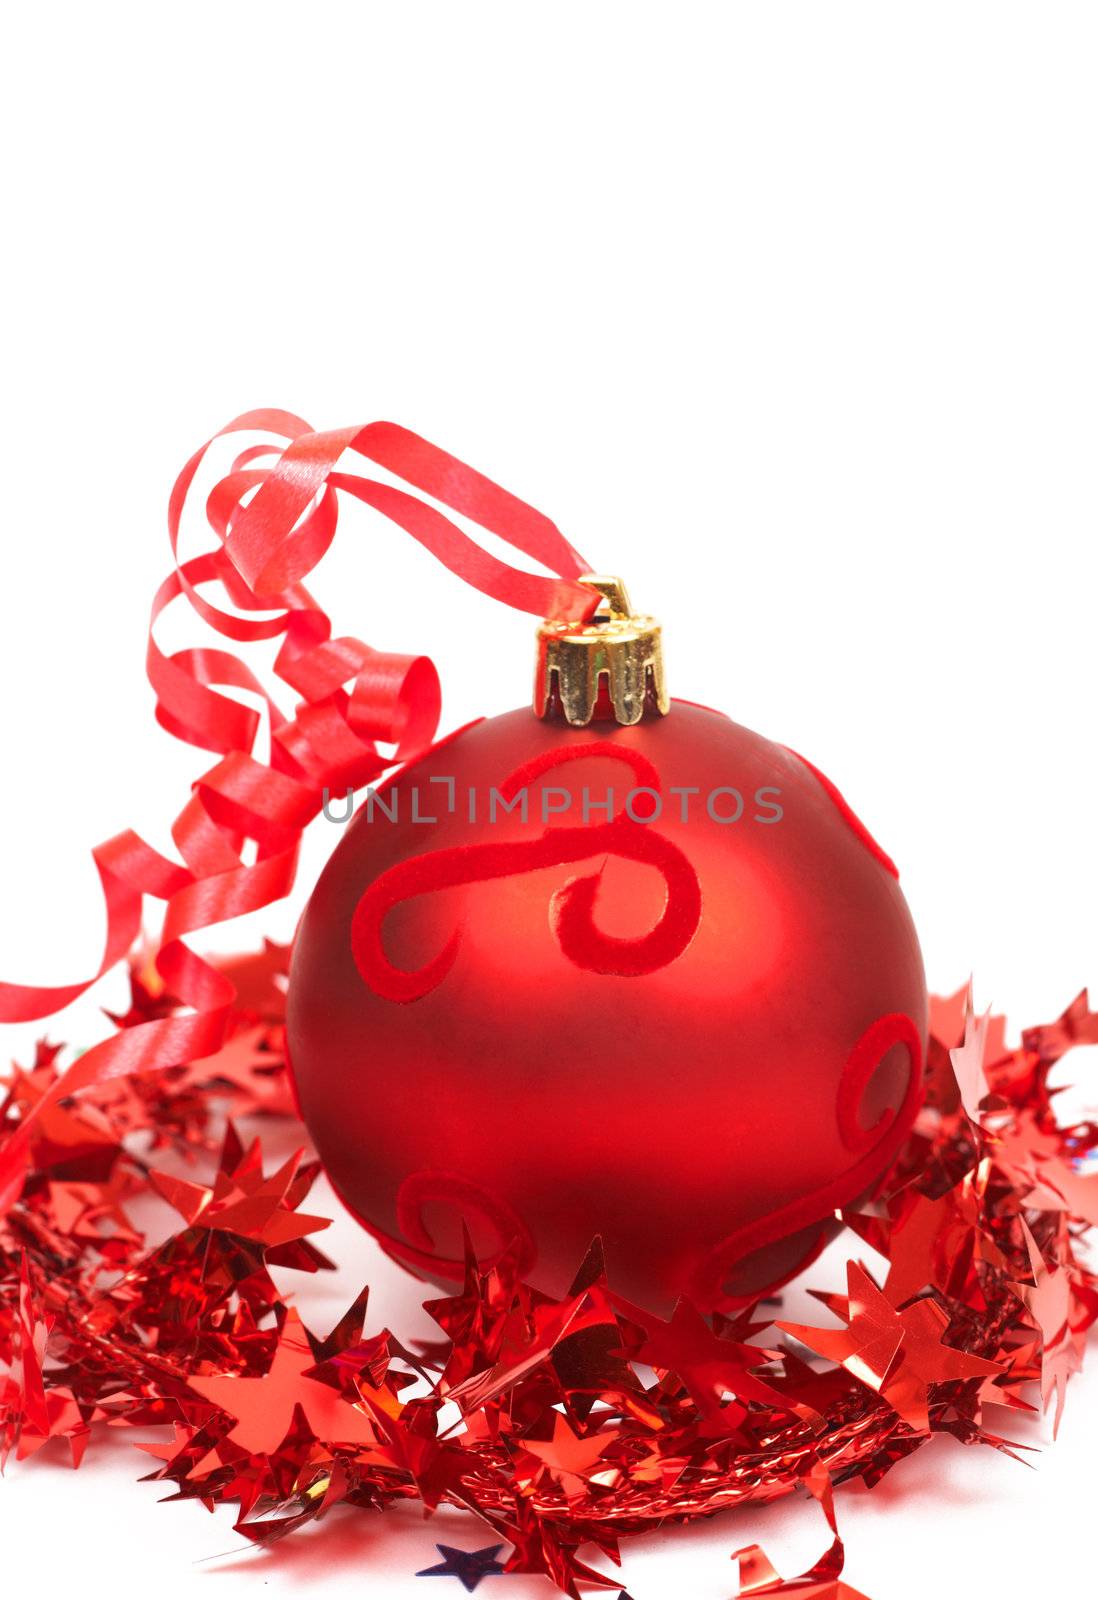 Red Christmas bauble by Elenat